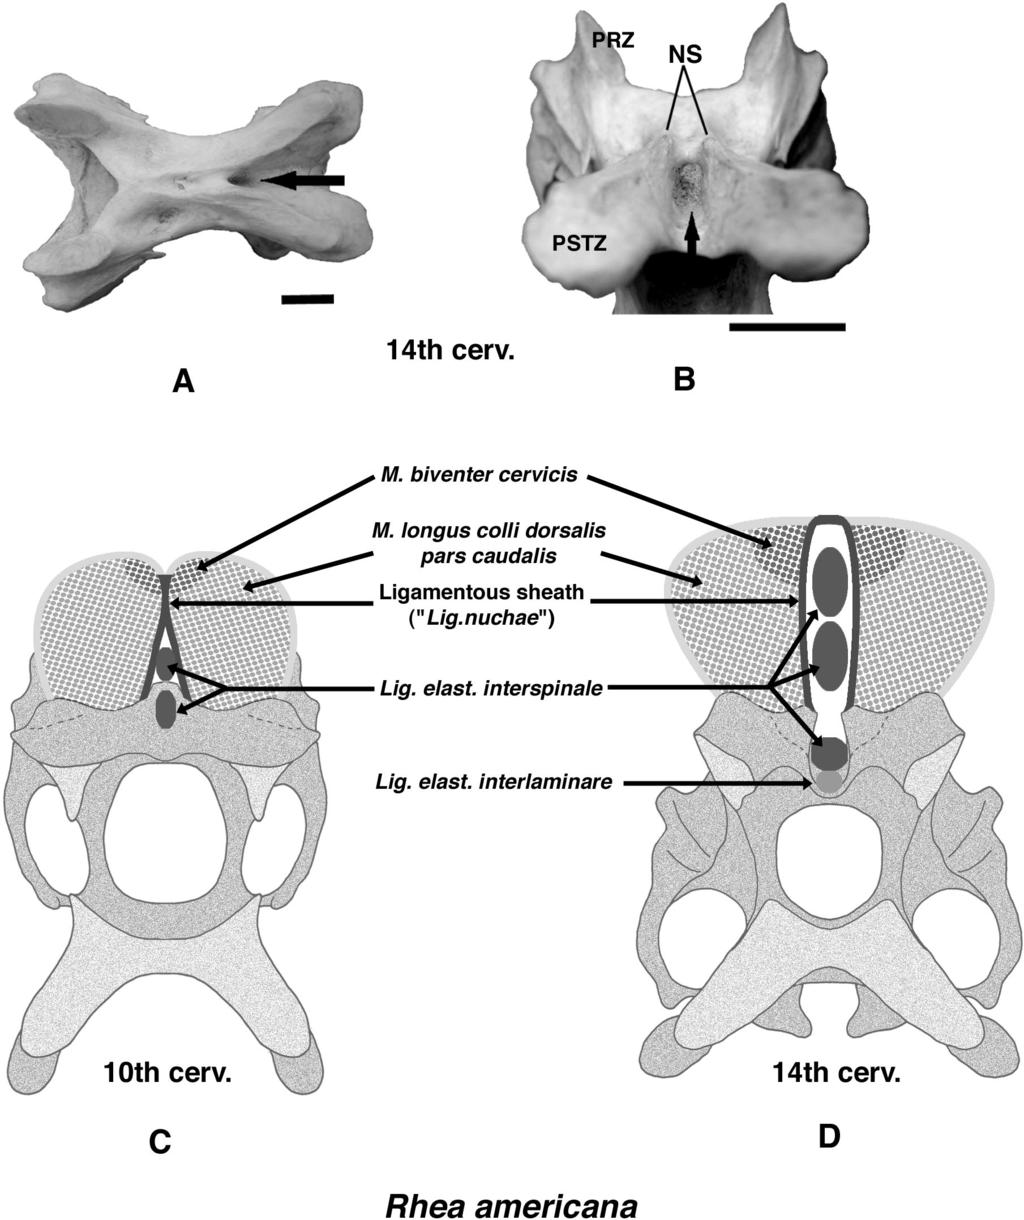 168 JOURNAL OF VERTEBRATE PALEONTOLOGY, VOL. 24, NO. 1, 2004 FIGURE 2. Topological relationships among the vertebra, ligaments and median epaxial muscles in Rhea americana.